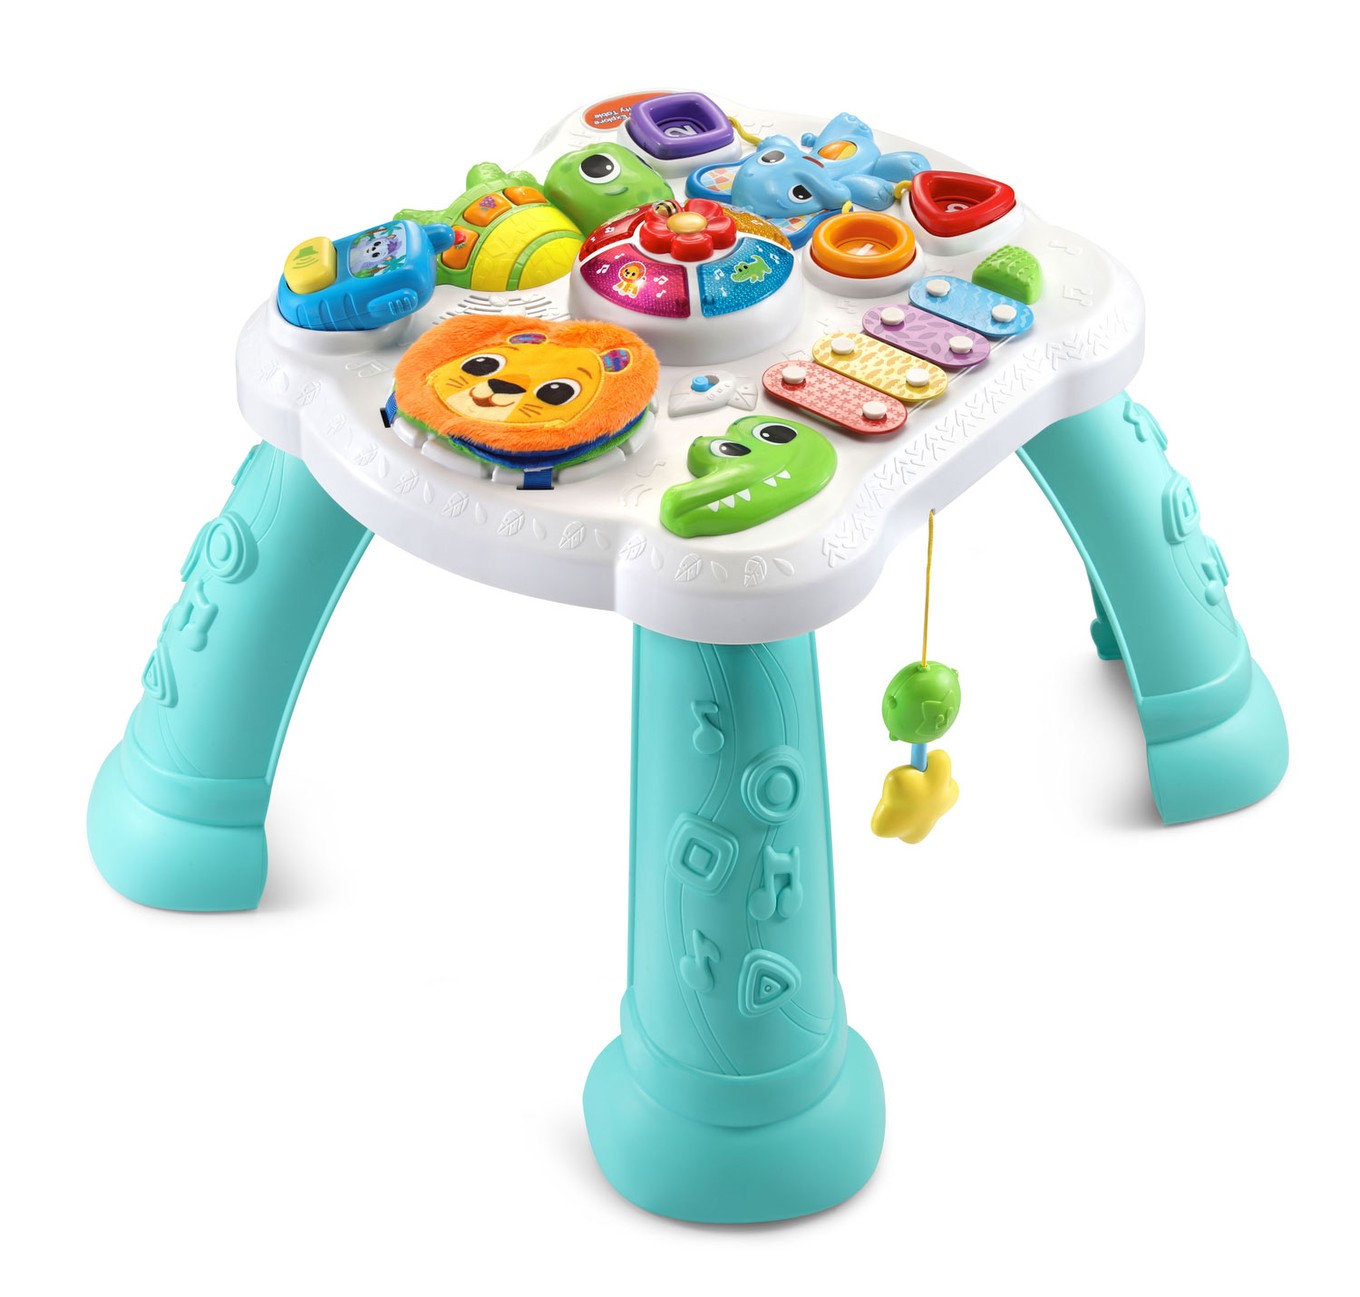 Sit-to-Stand Ultimate Alphabet Train by VTech - NAPPA Awards